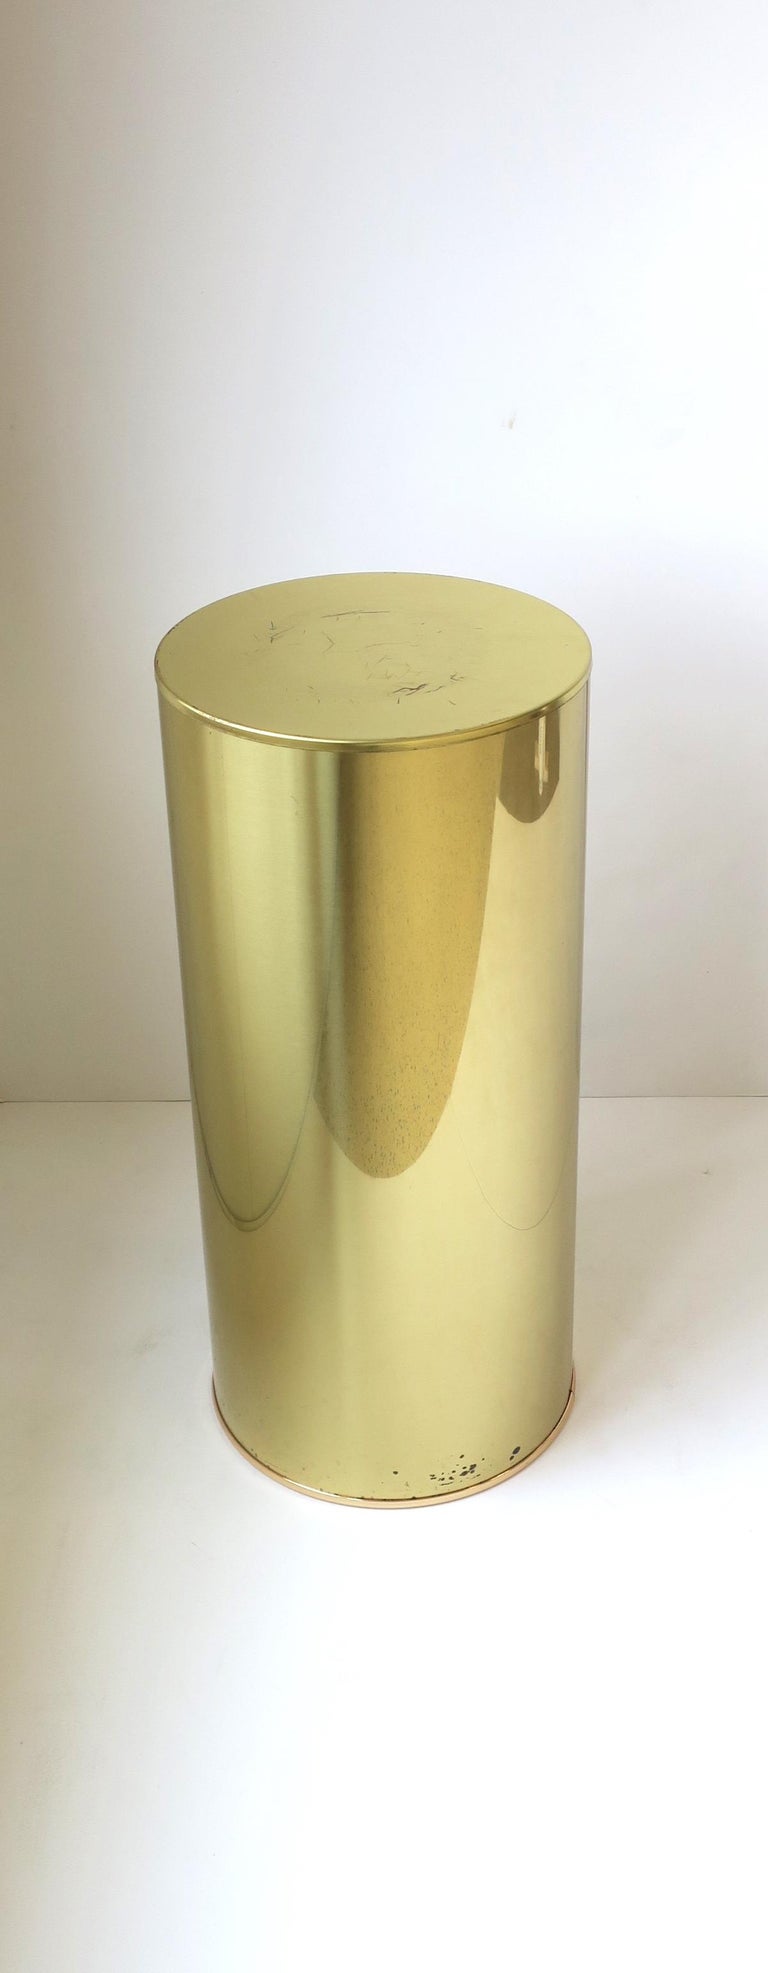 A Modern style Post-Modern period brass plated pedestal column pillar stand signed by designers C. Jere, circa 1970s, 1980s. A great piece for display, sculpture, plant, etc., or even as a side/drinks table albeit slightly on the higher side.